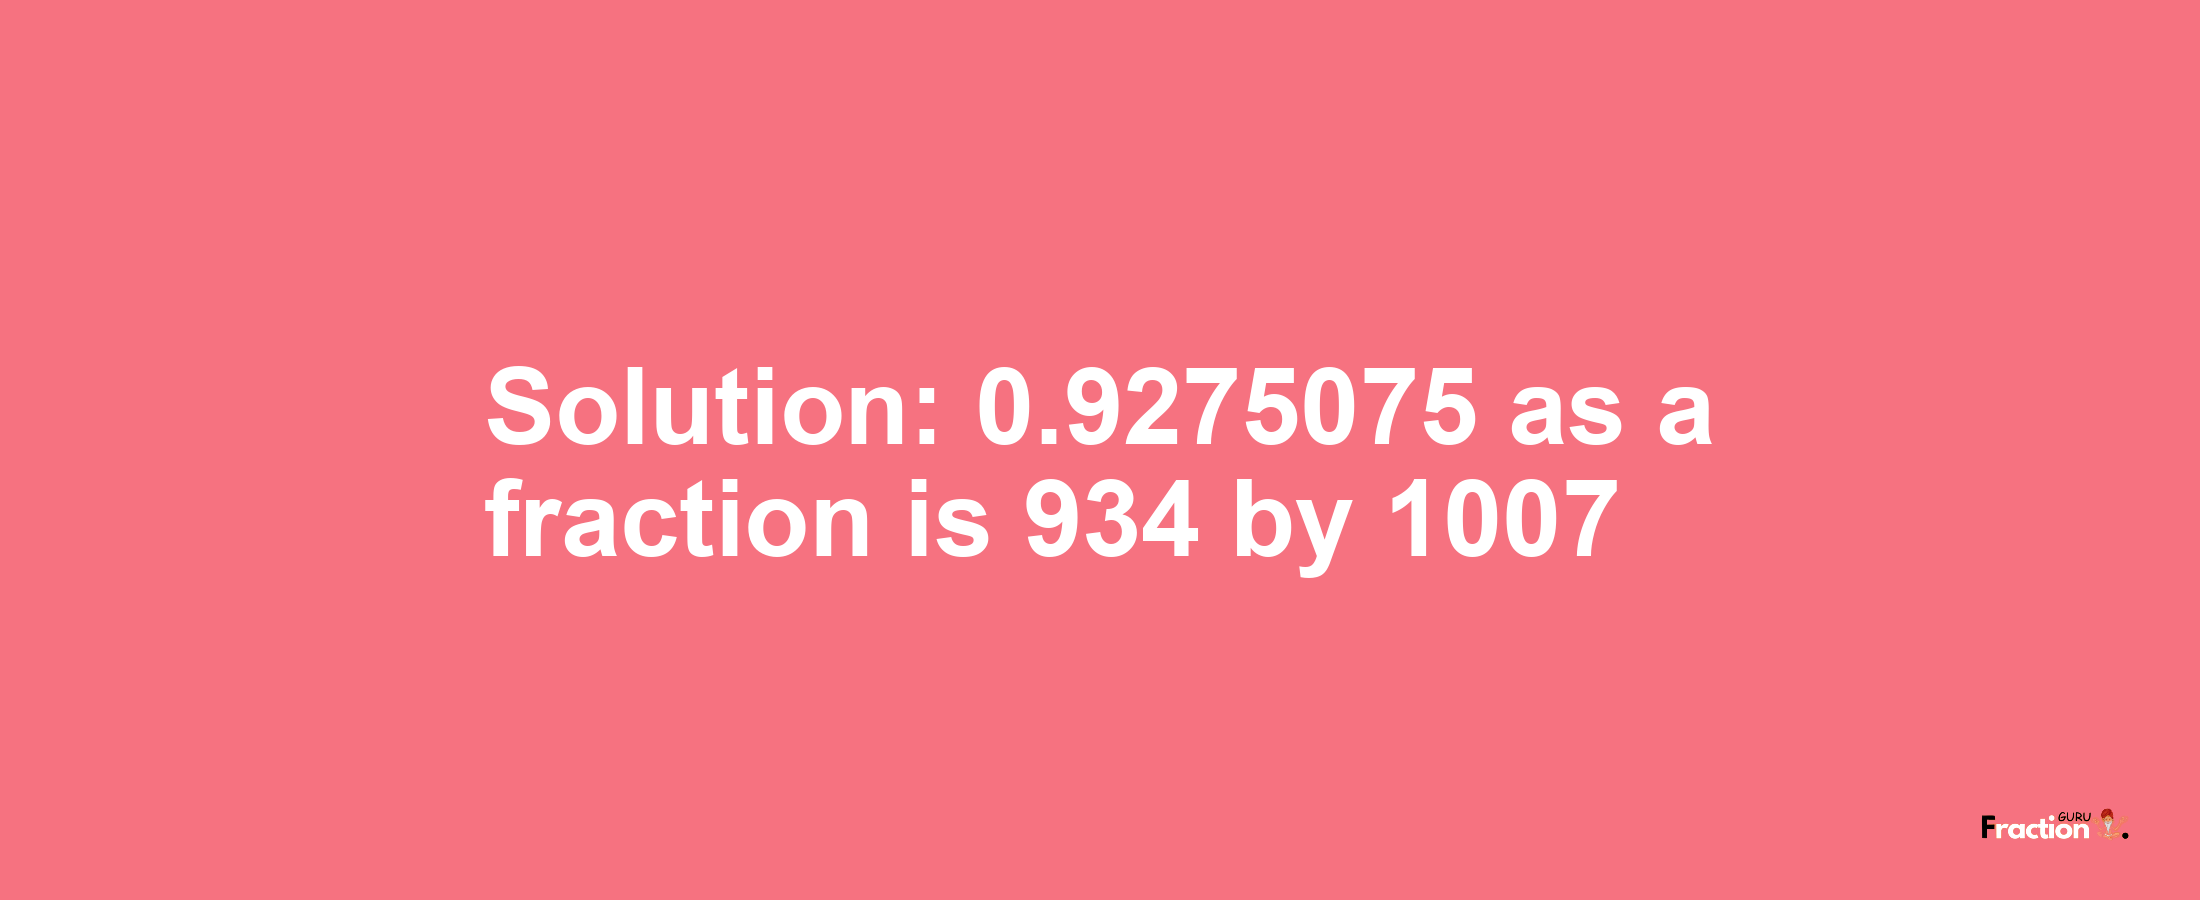 Solution:0.9275075 as a fraction is 934/1007